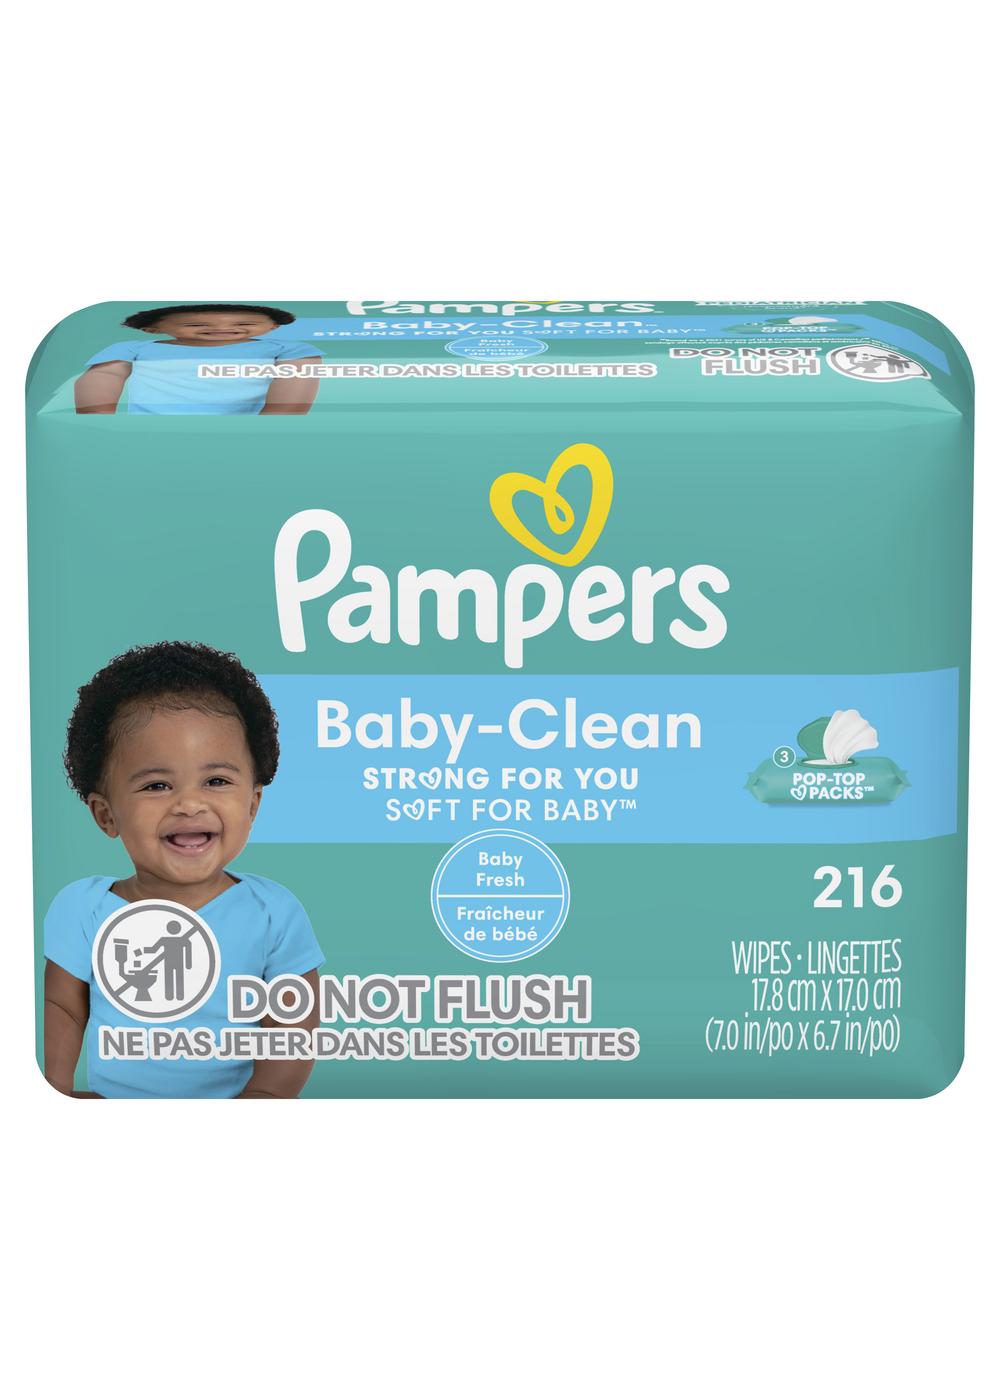 Pampers Baby Wipes - Fresh Scented 3 Pk; image 1 of 10